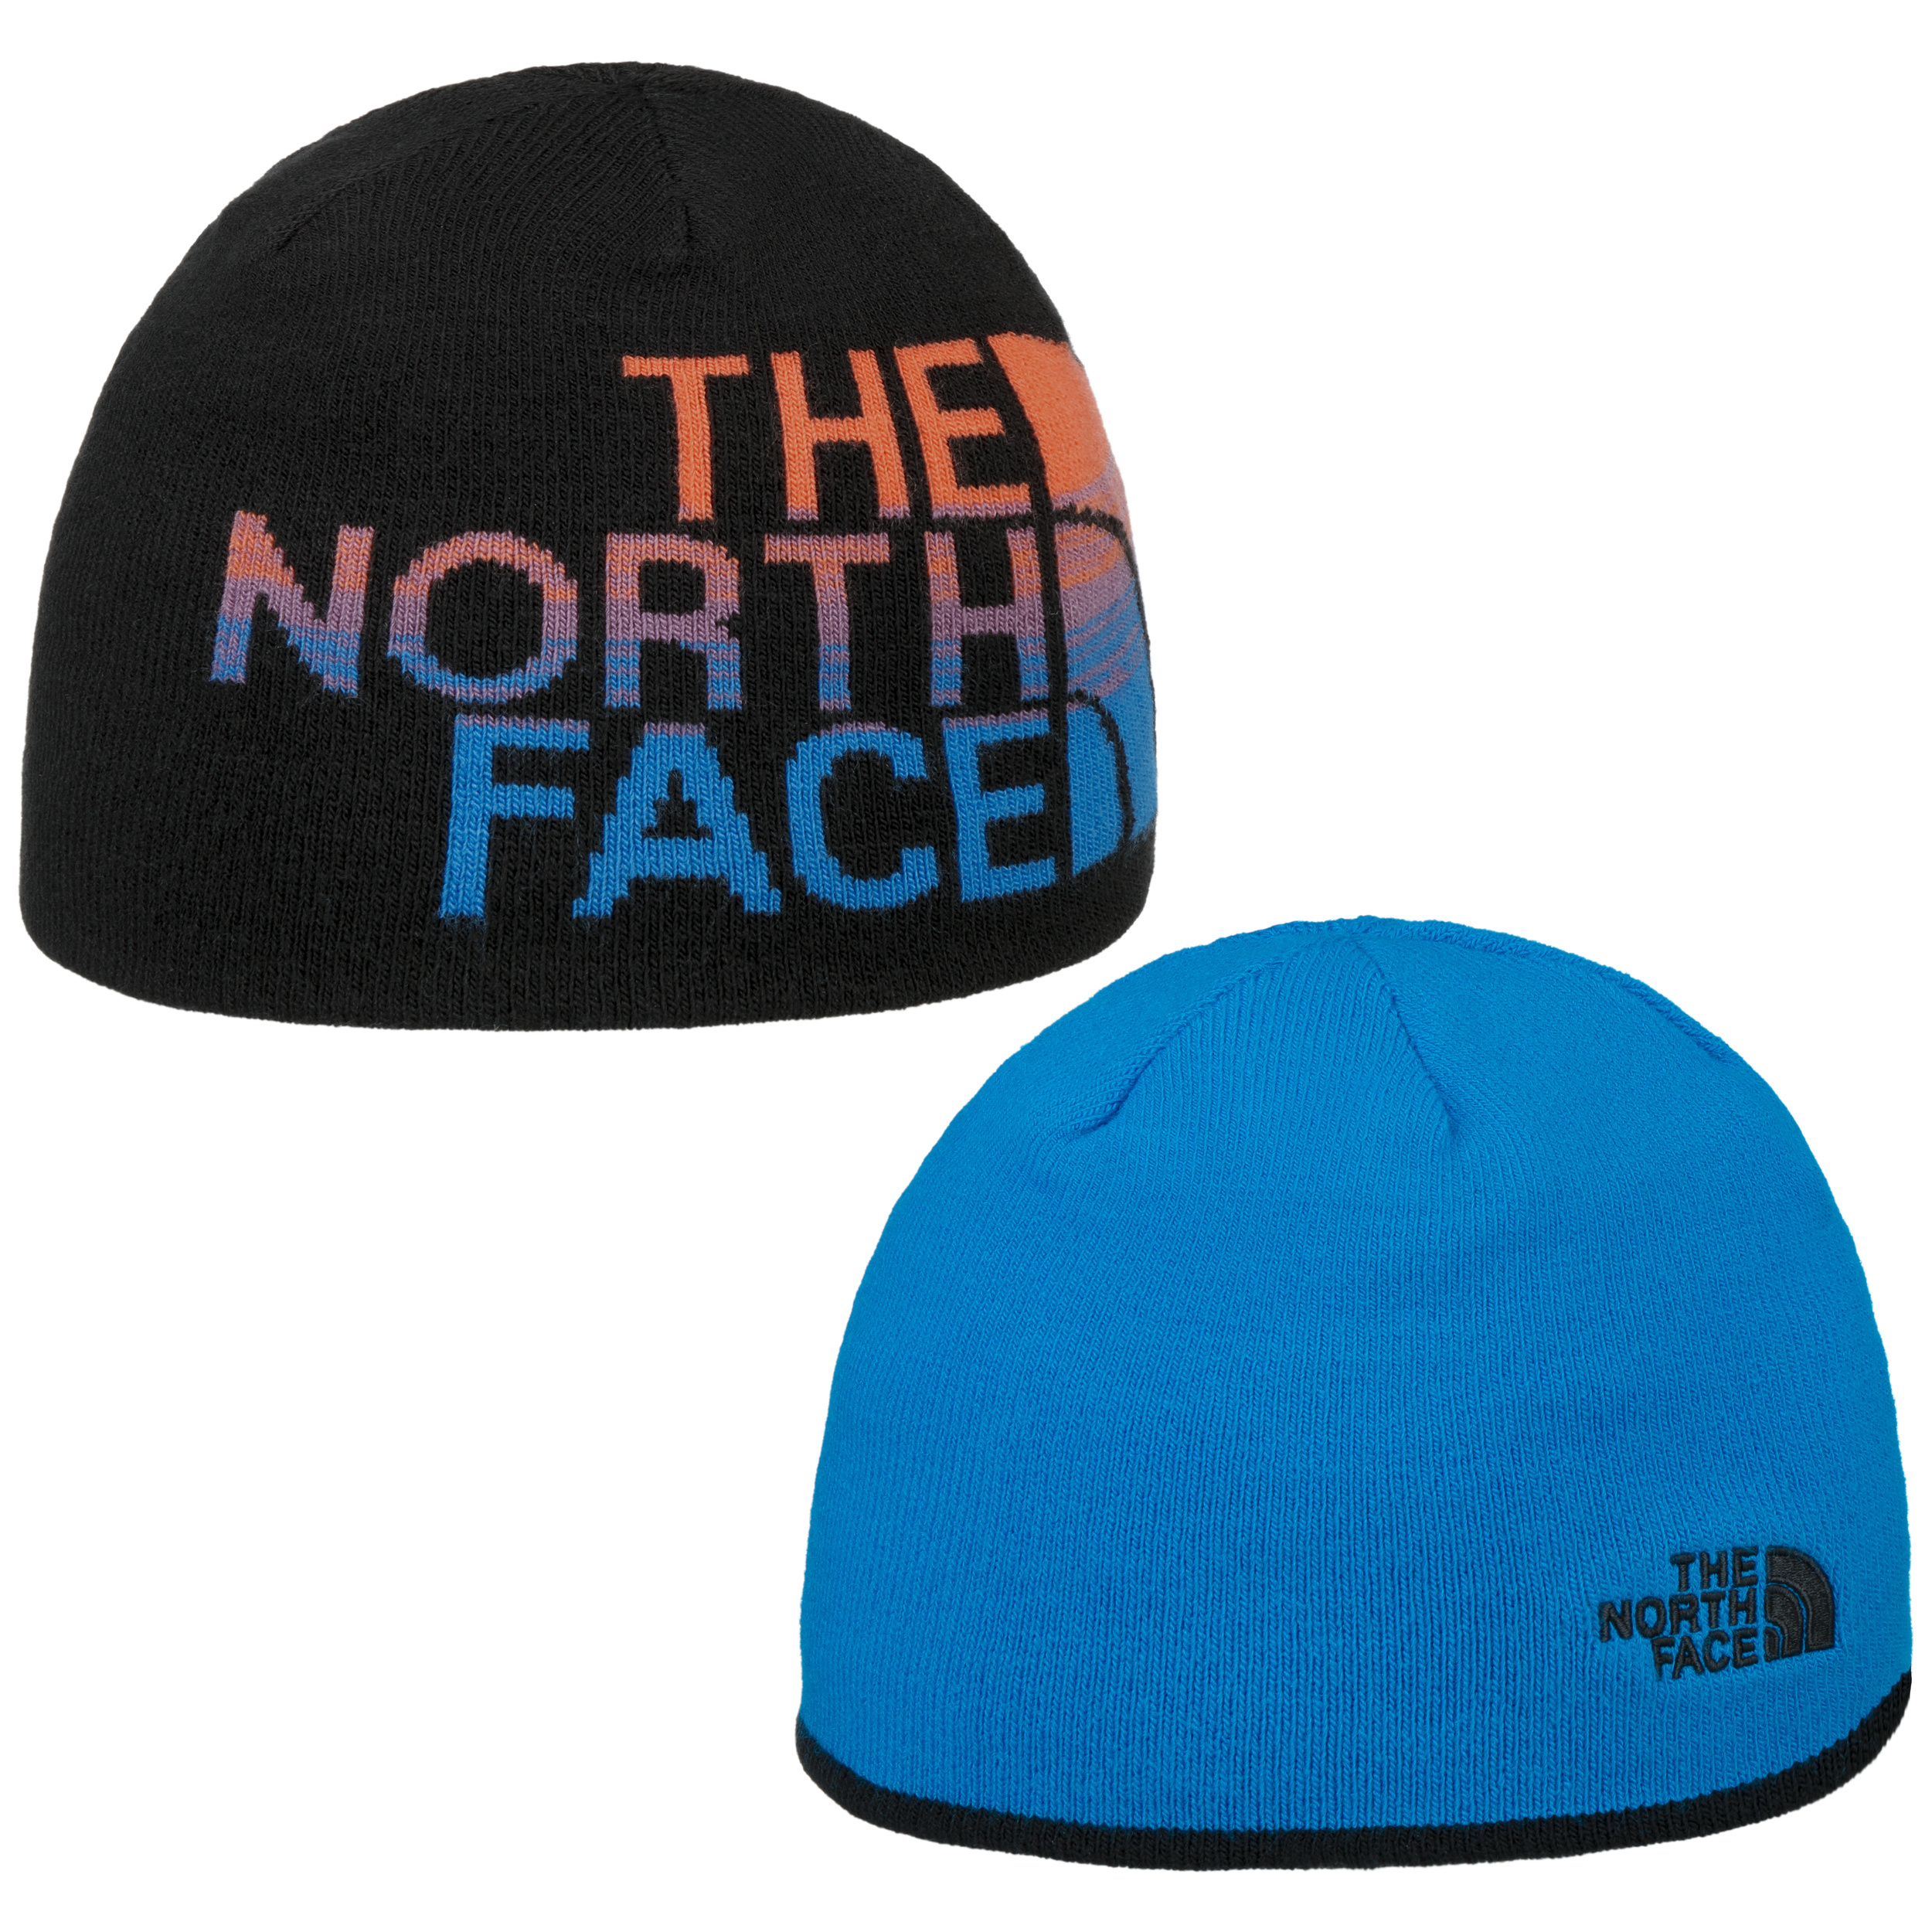 red north face hat